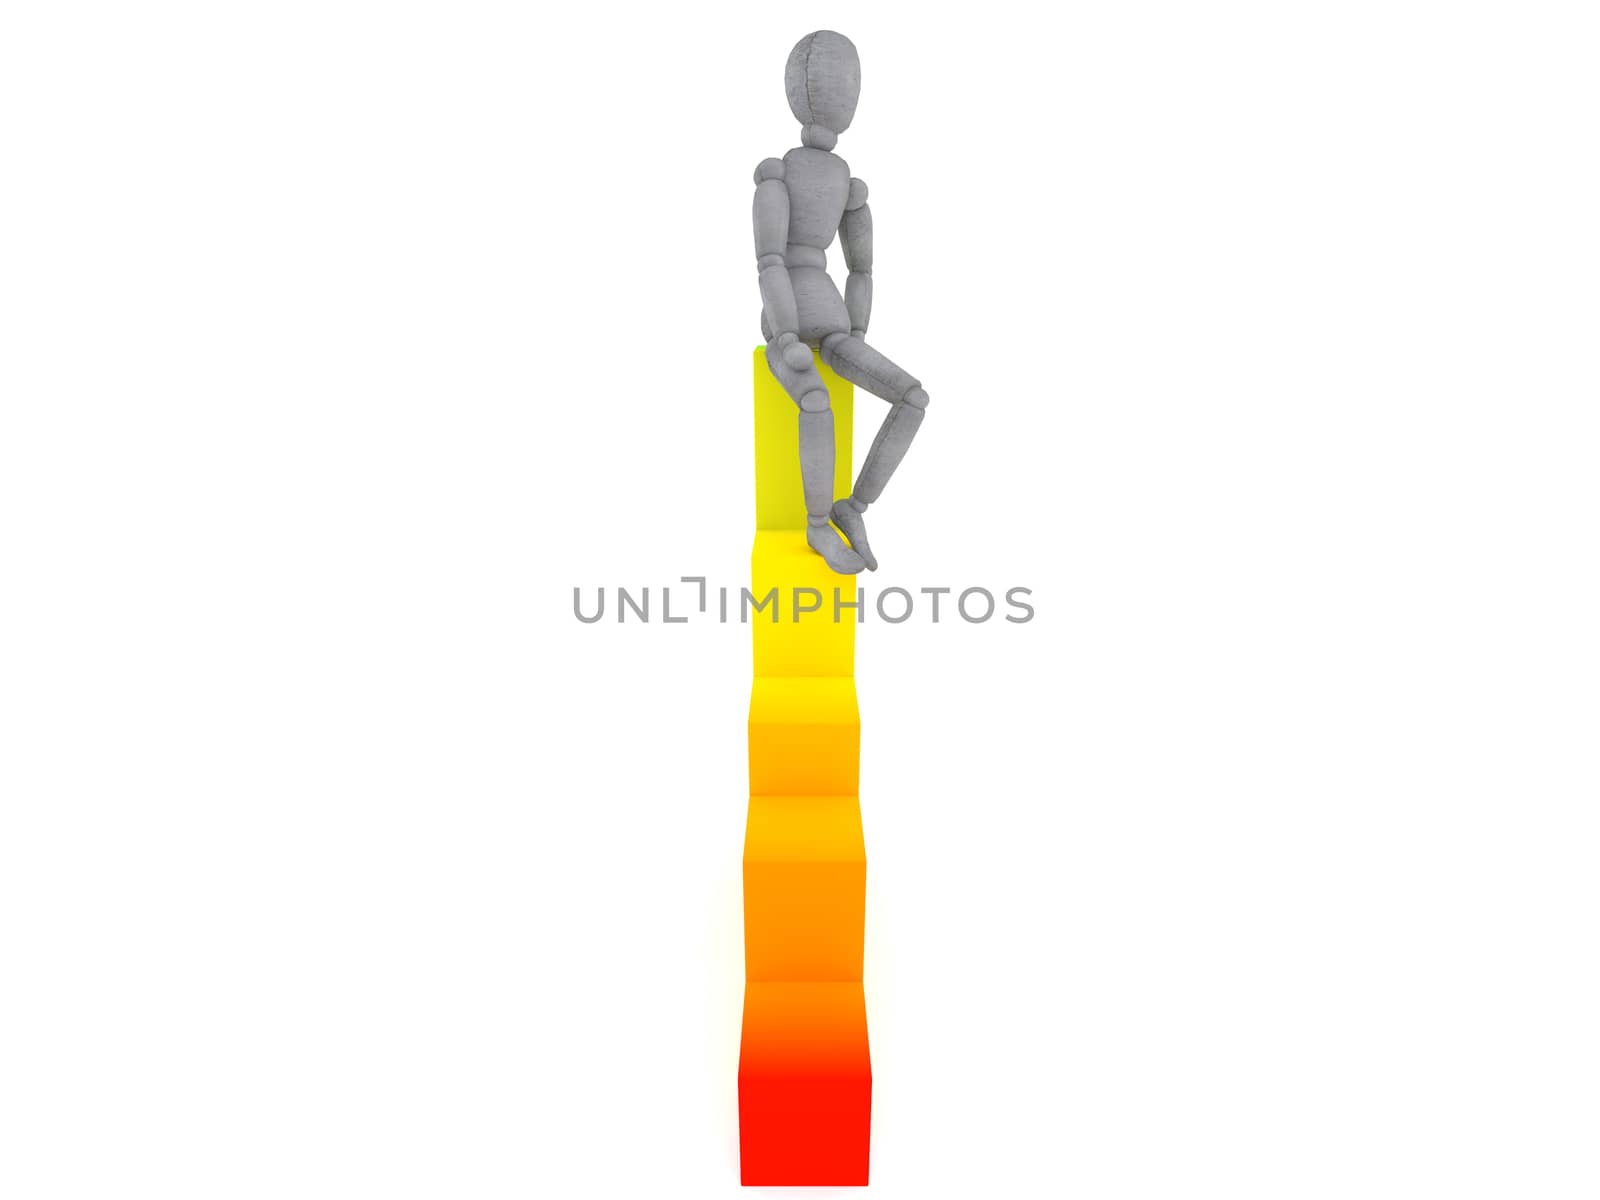 doll model sits on the highest point of the graph in a relaxed position